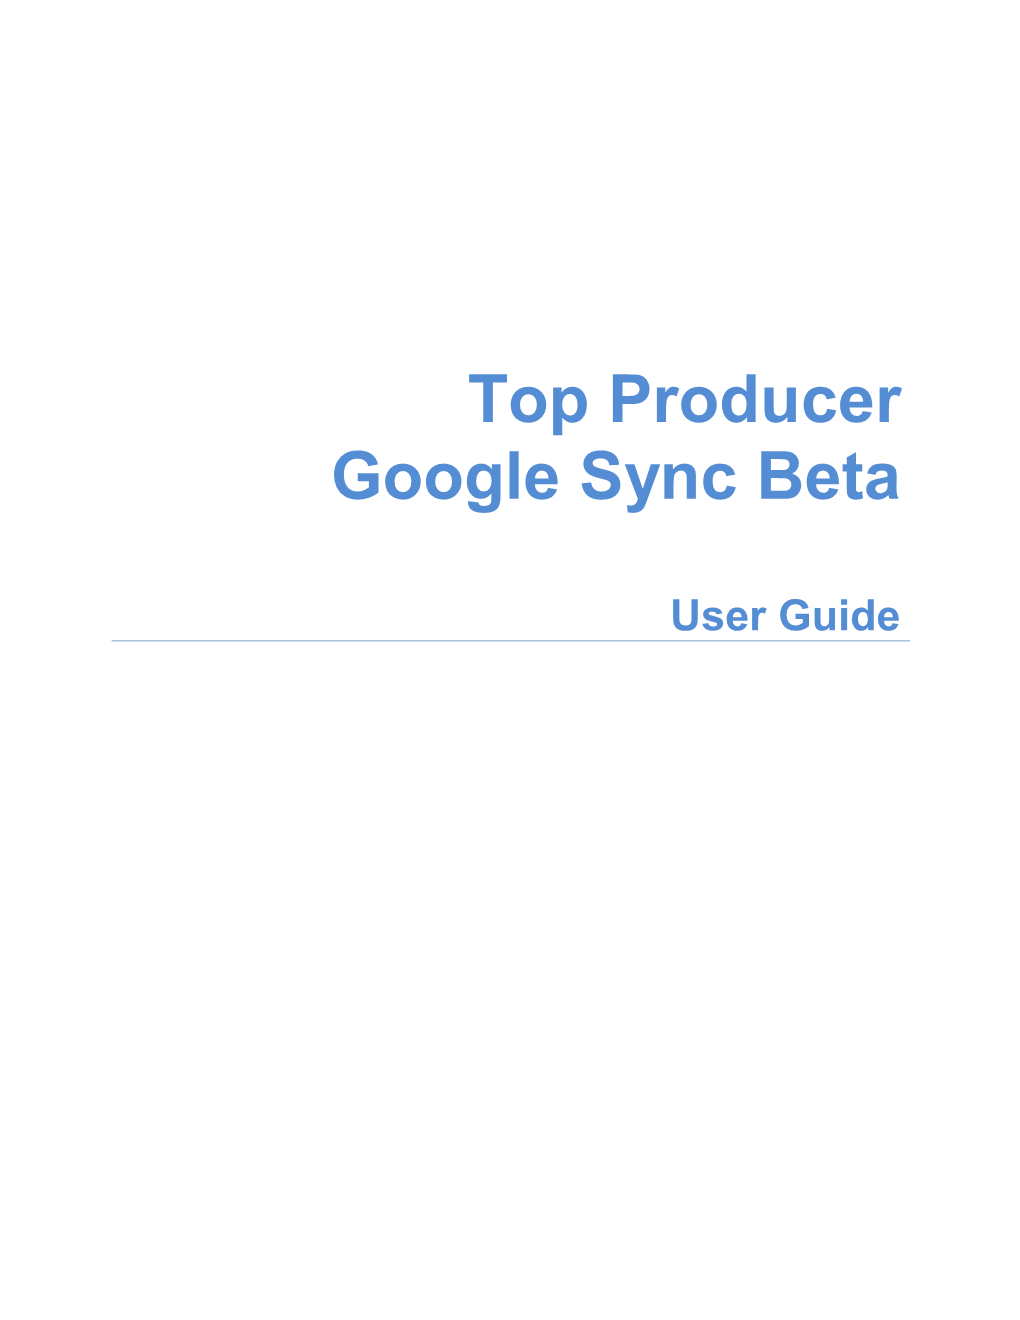 Top Producer Google Sync User Guide